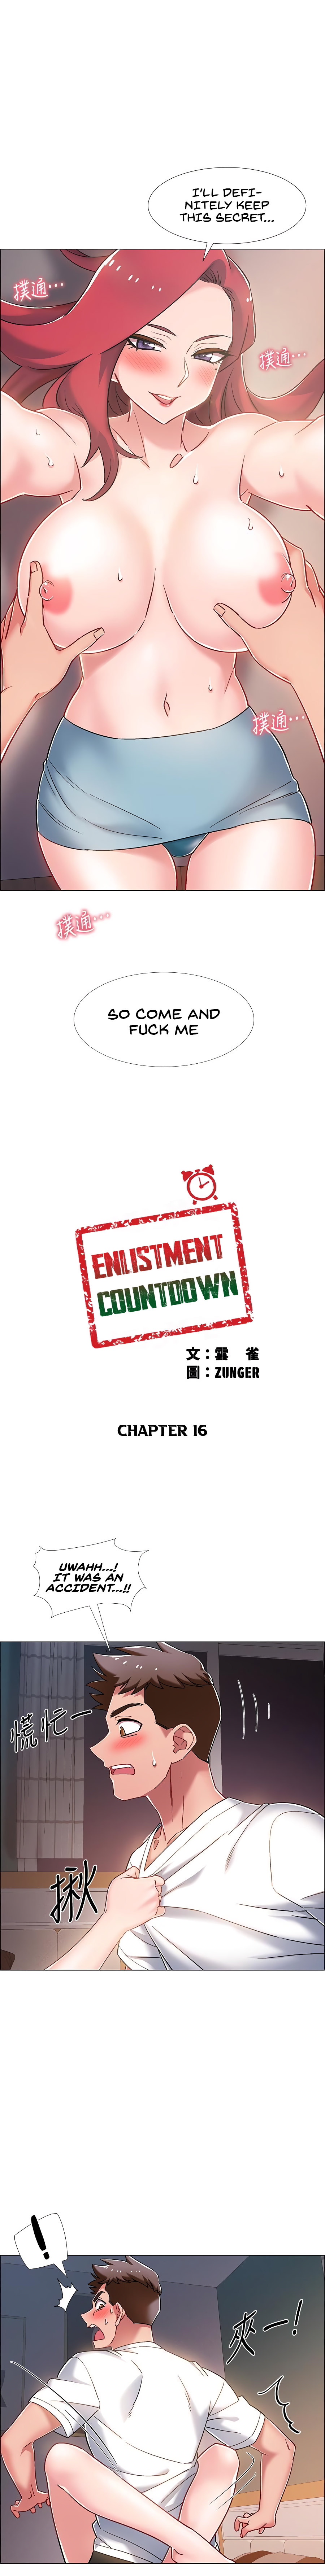 Enlistment Countdown - Chapter 16 Page 2